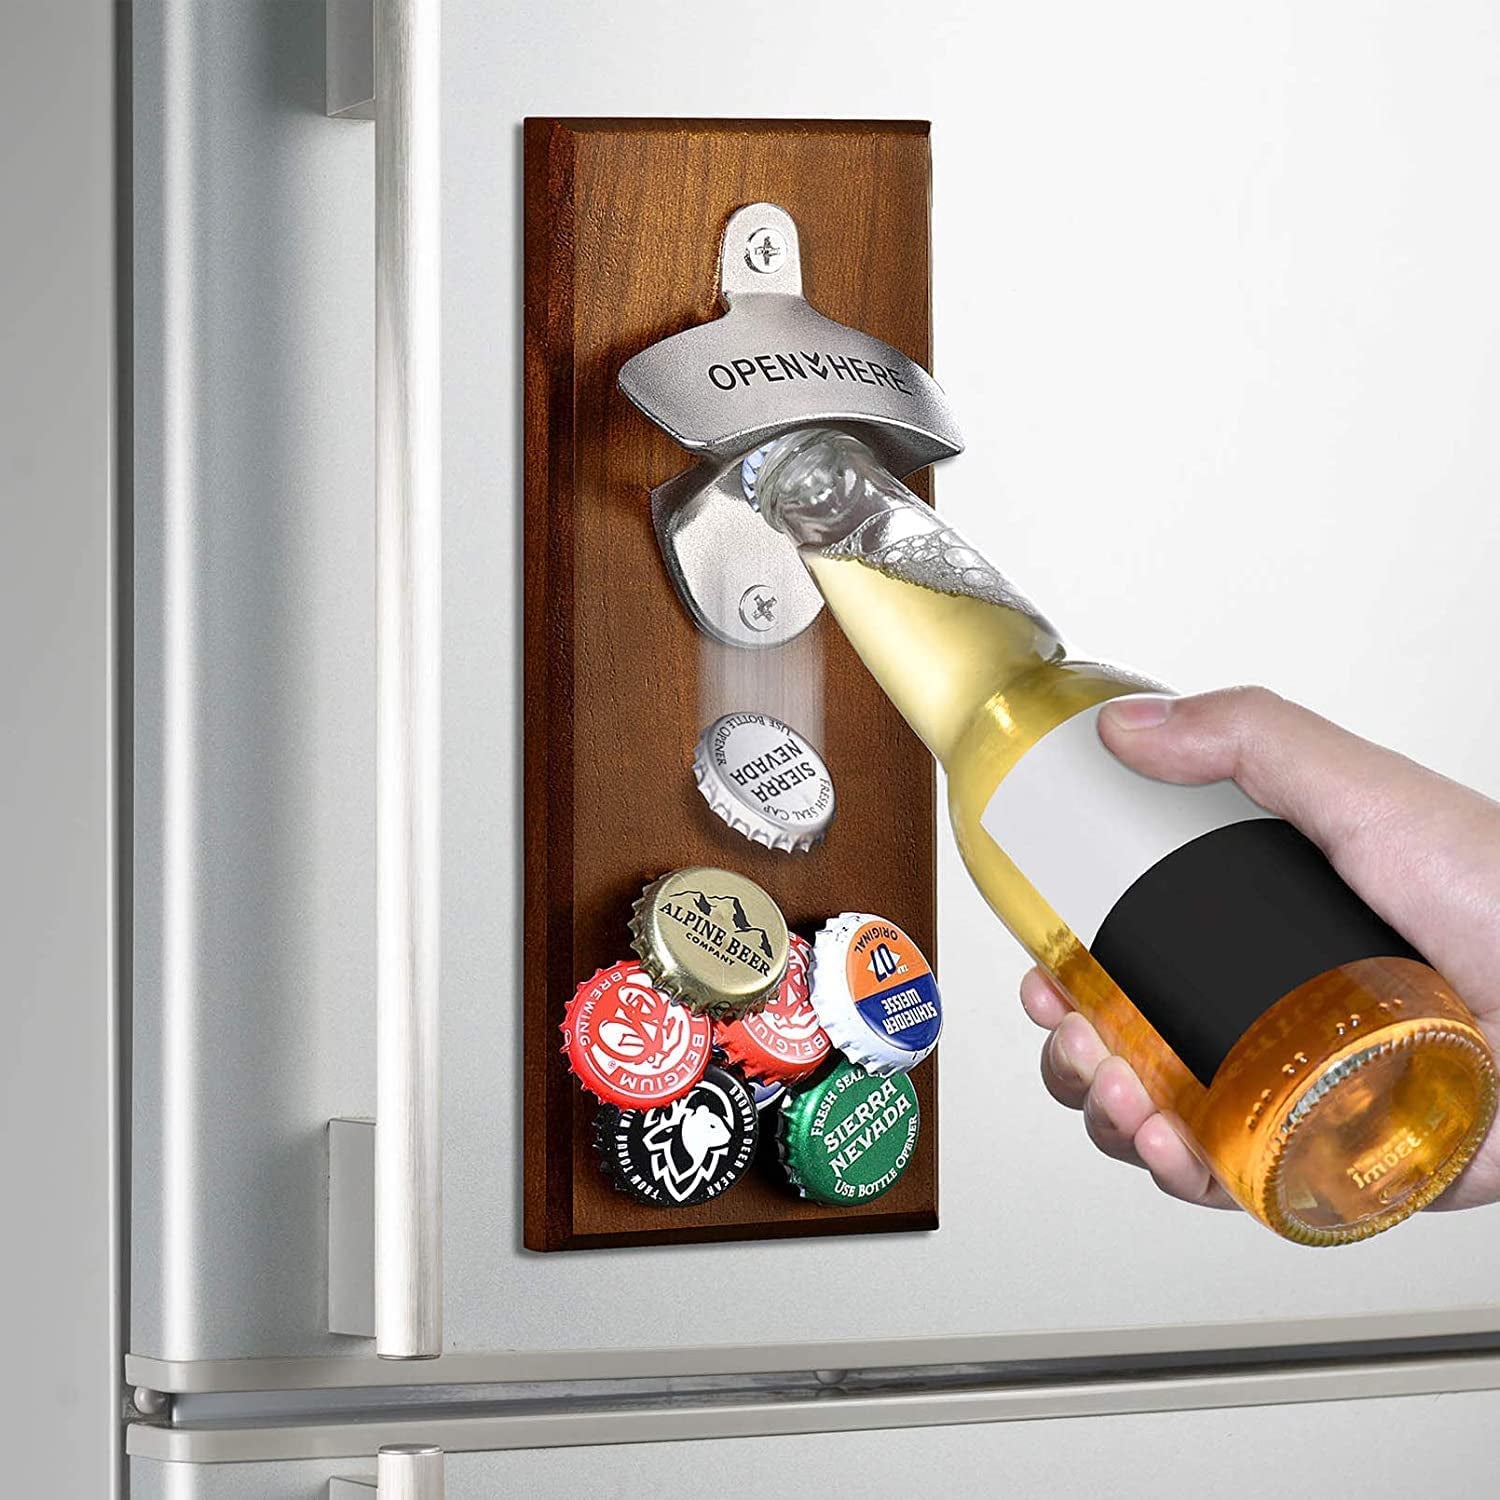 Hand hold beer bottle using opener as caps magnetically adhere to opener